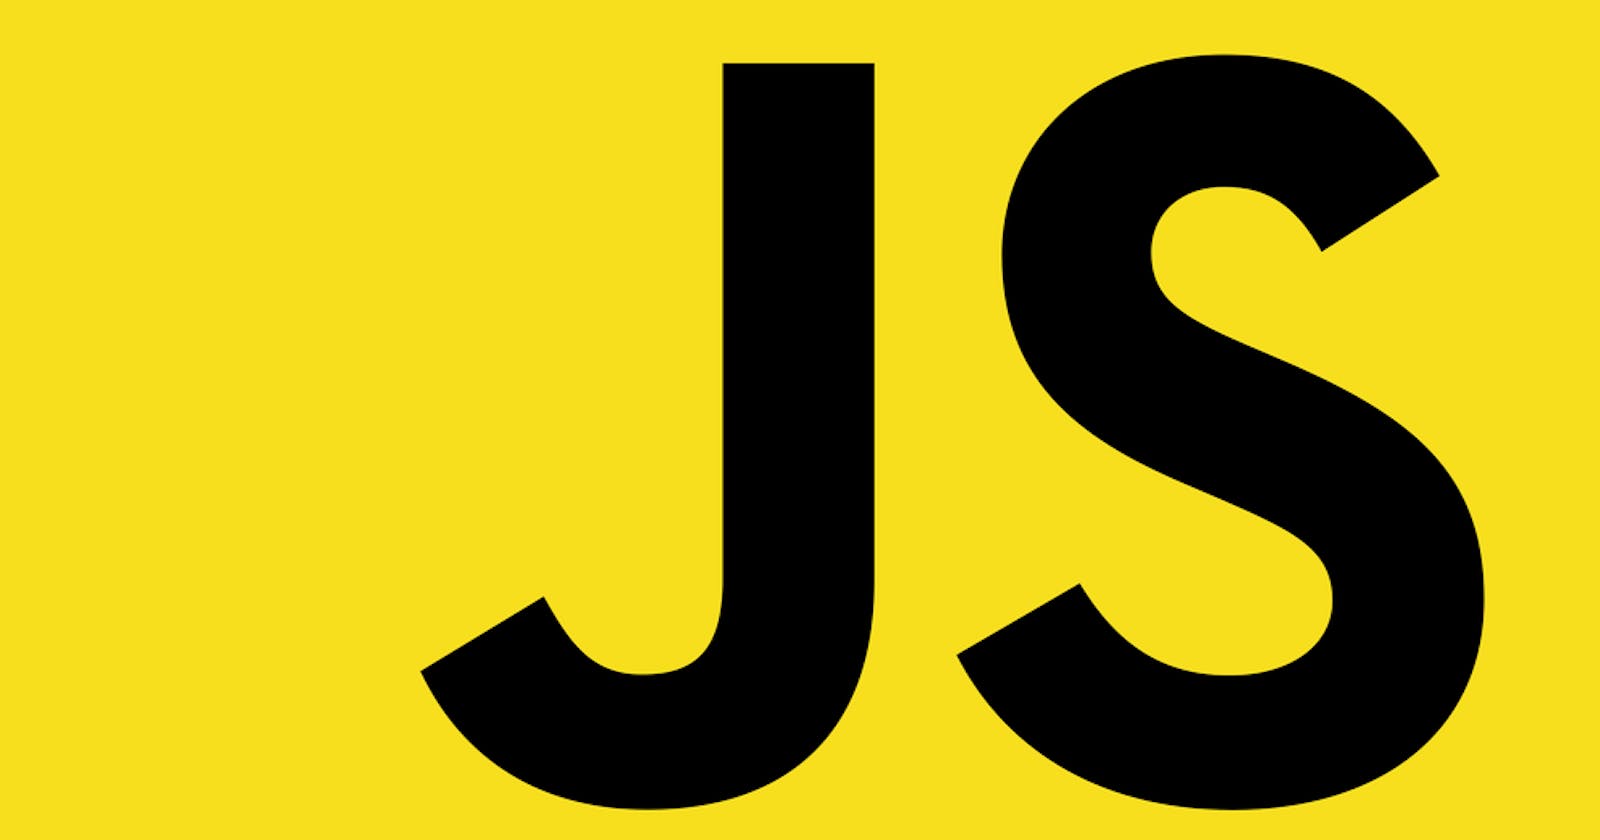 5 Rules to master ‘this’ in Javascript